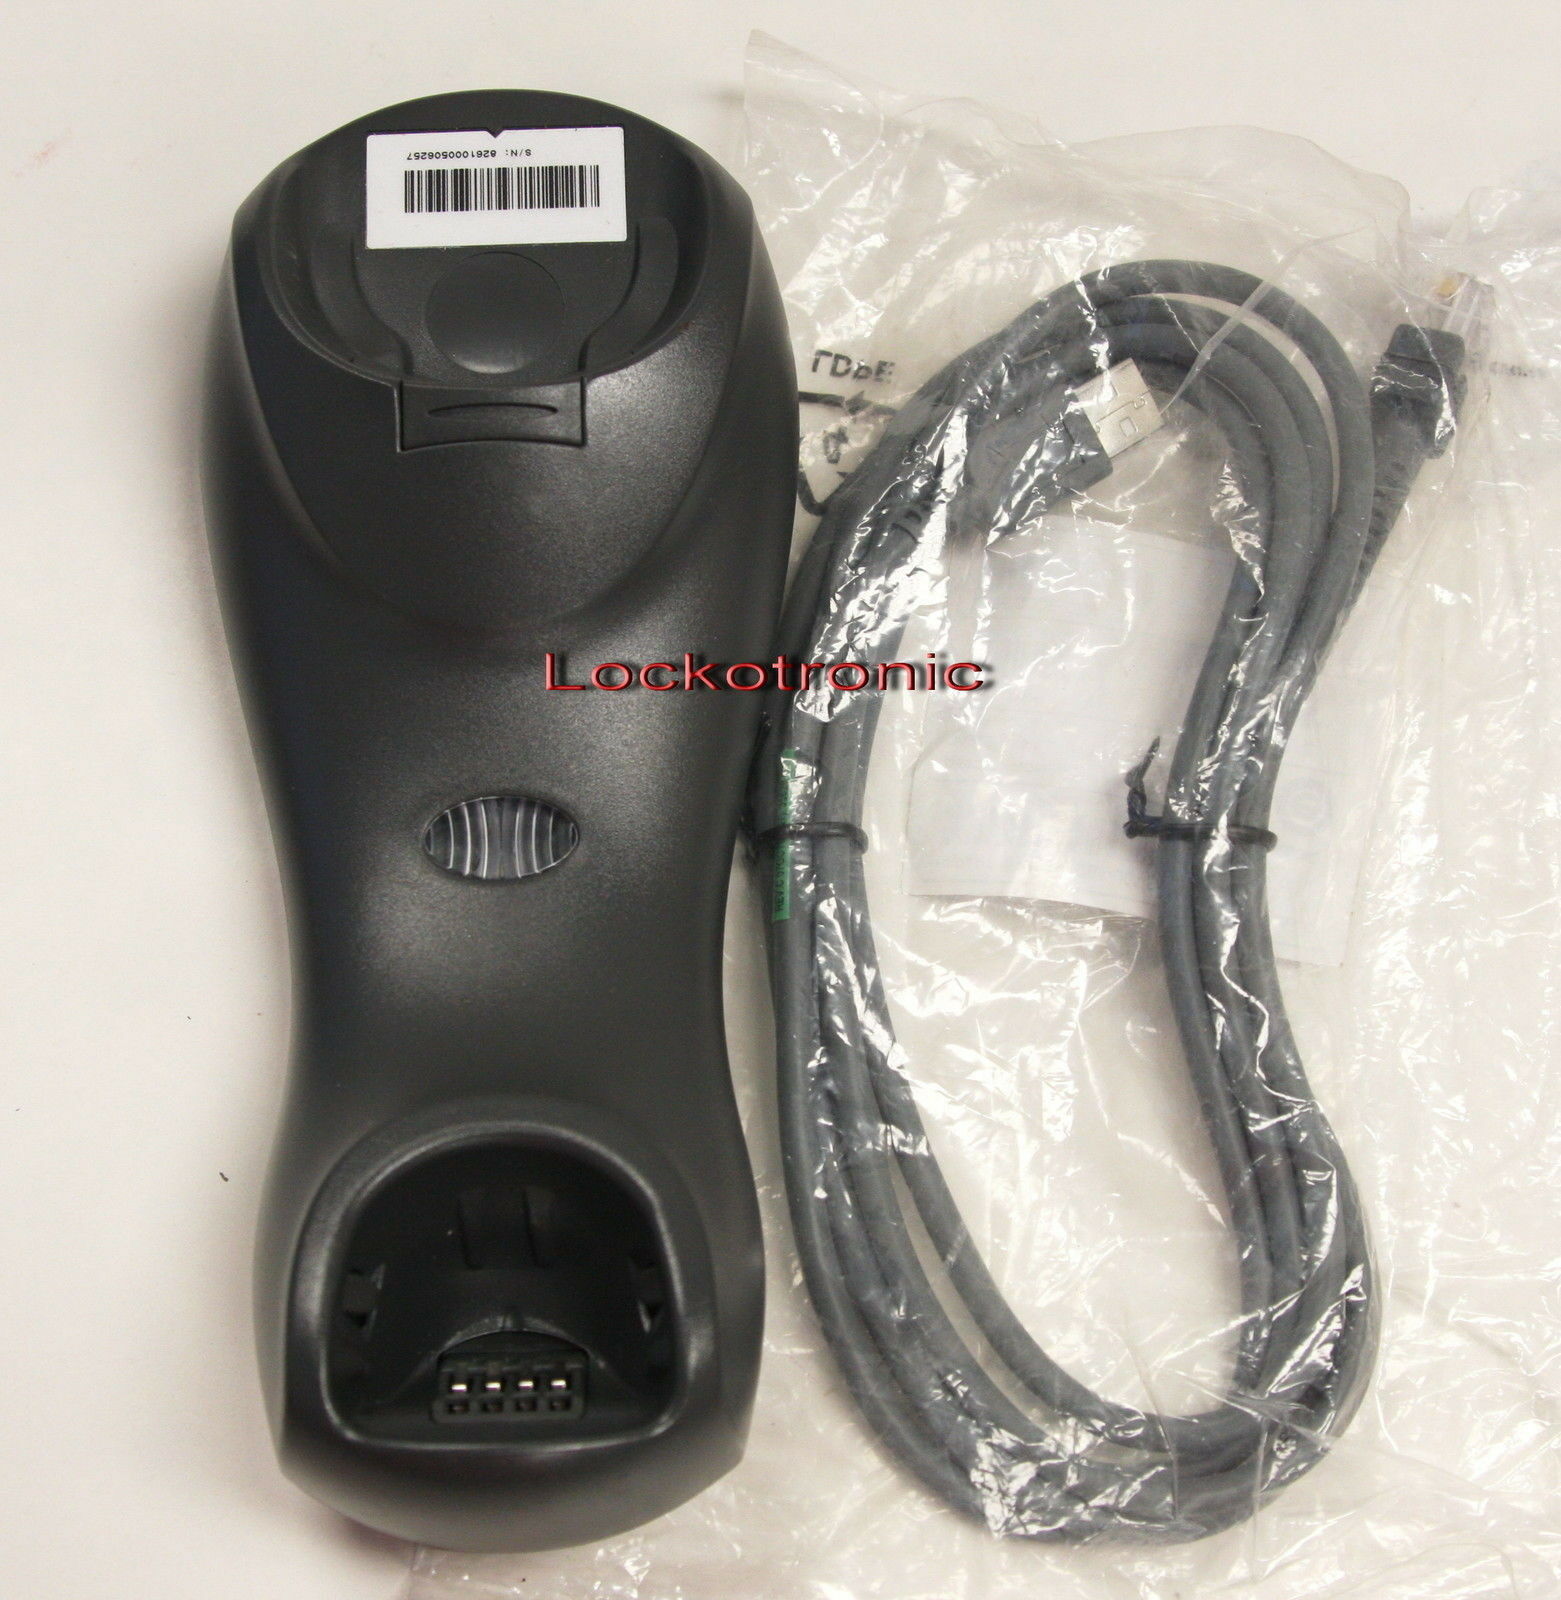 Cradle STB4278 Used Tested Working Symbol Wireless USB Barcode Scanner DS6878